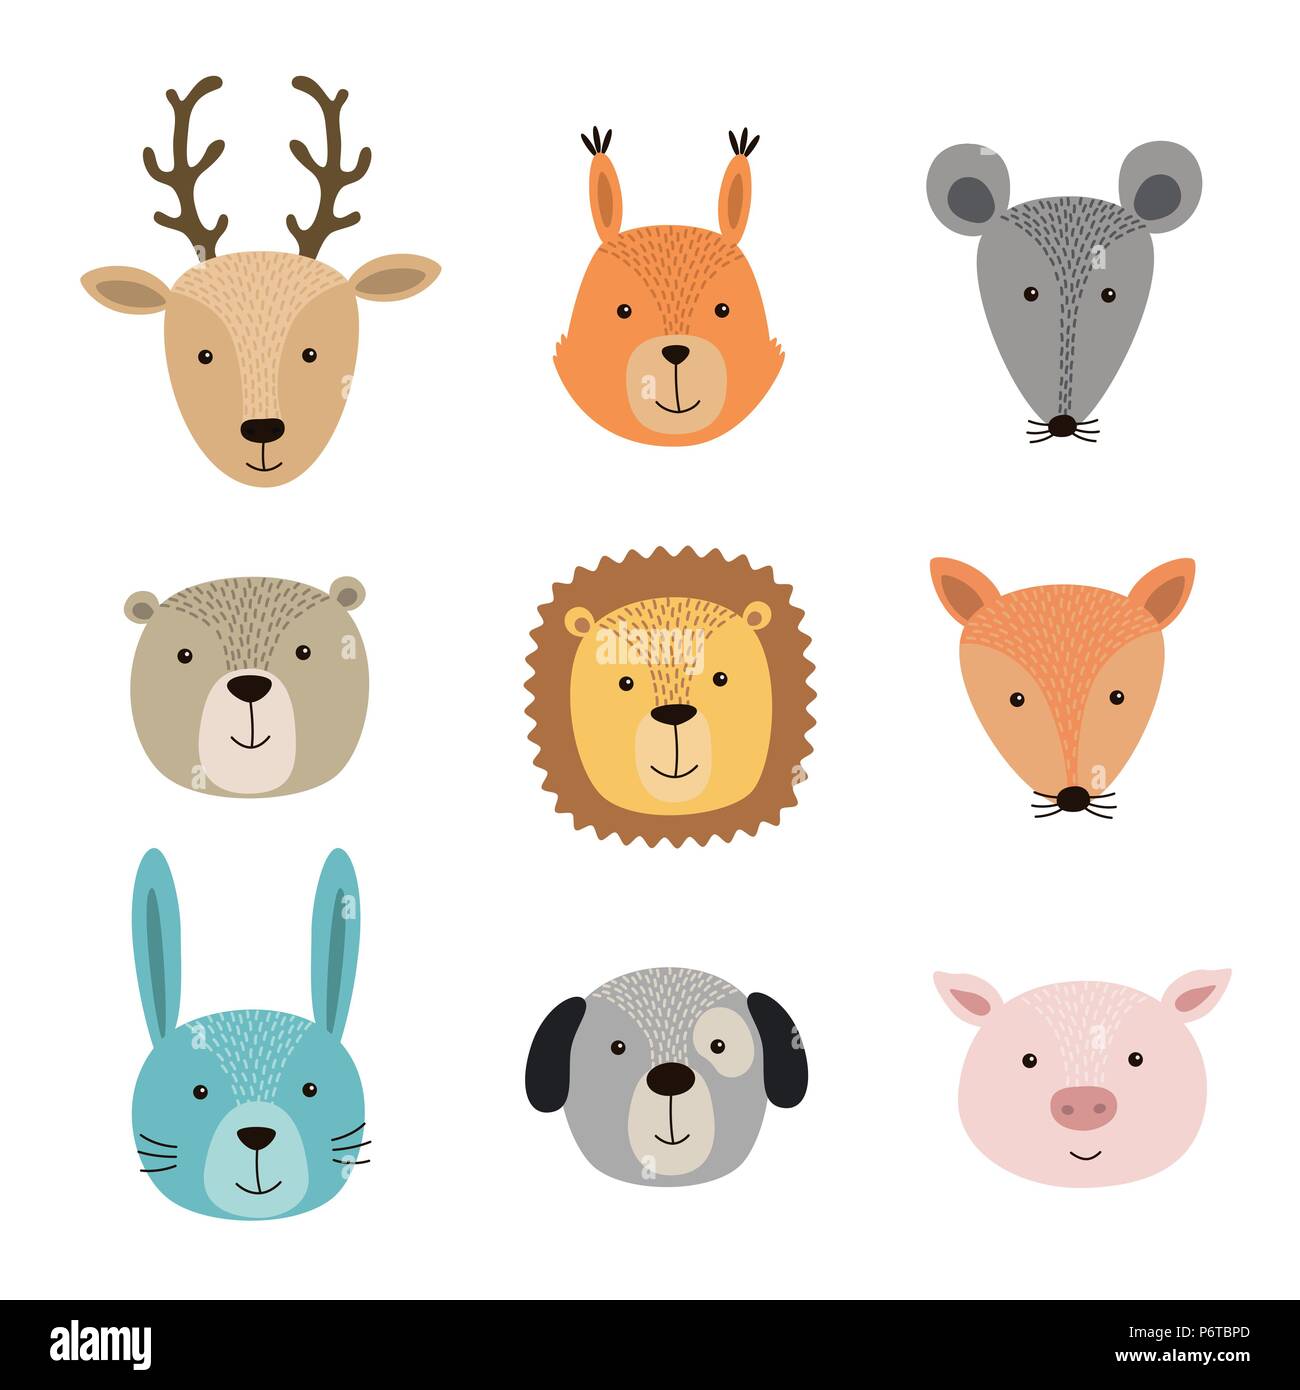 Vector illustration of animal faces including deer, squirrel, hare, lion, pig, fox, mouse, dog, bear Stock Vector